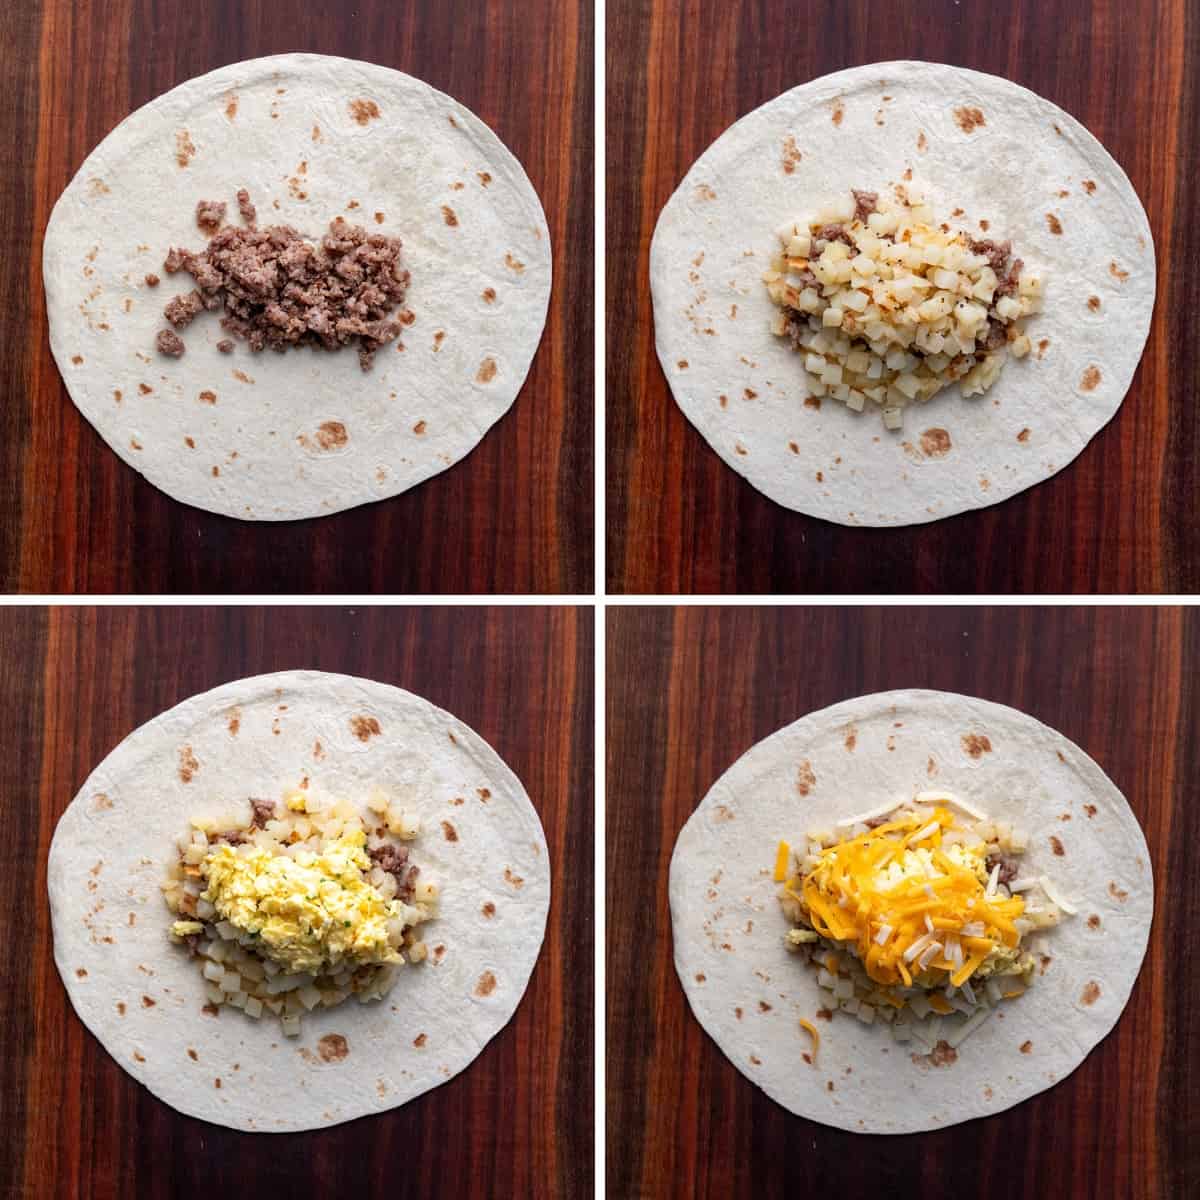 Steps for Assembling Freezer Breakfast Burritos with Meat, Potatoes, Eggs, and Cheese.